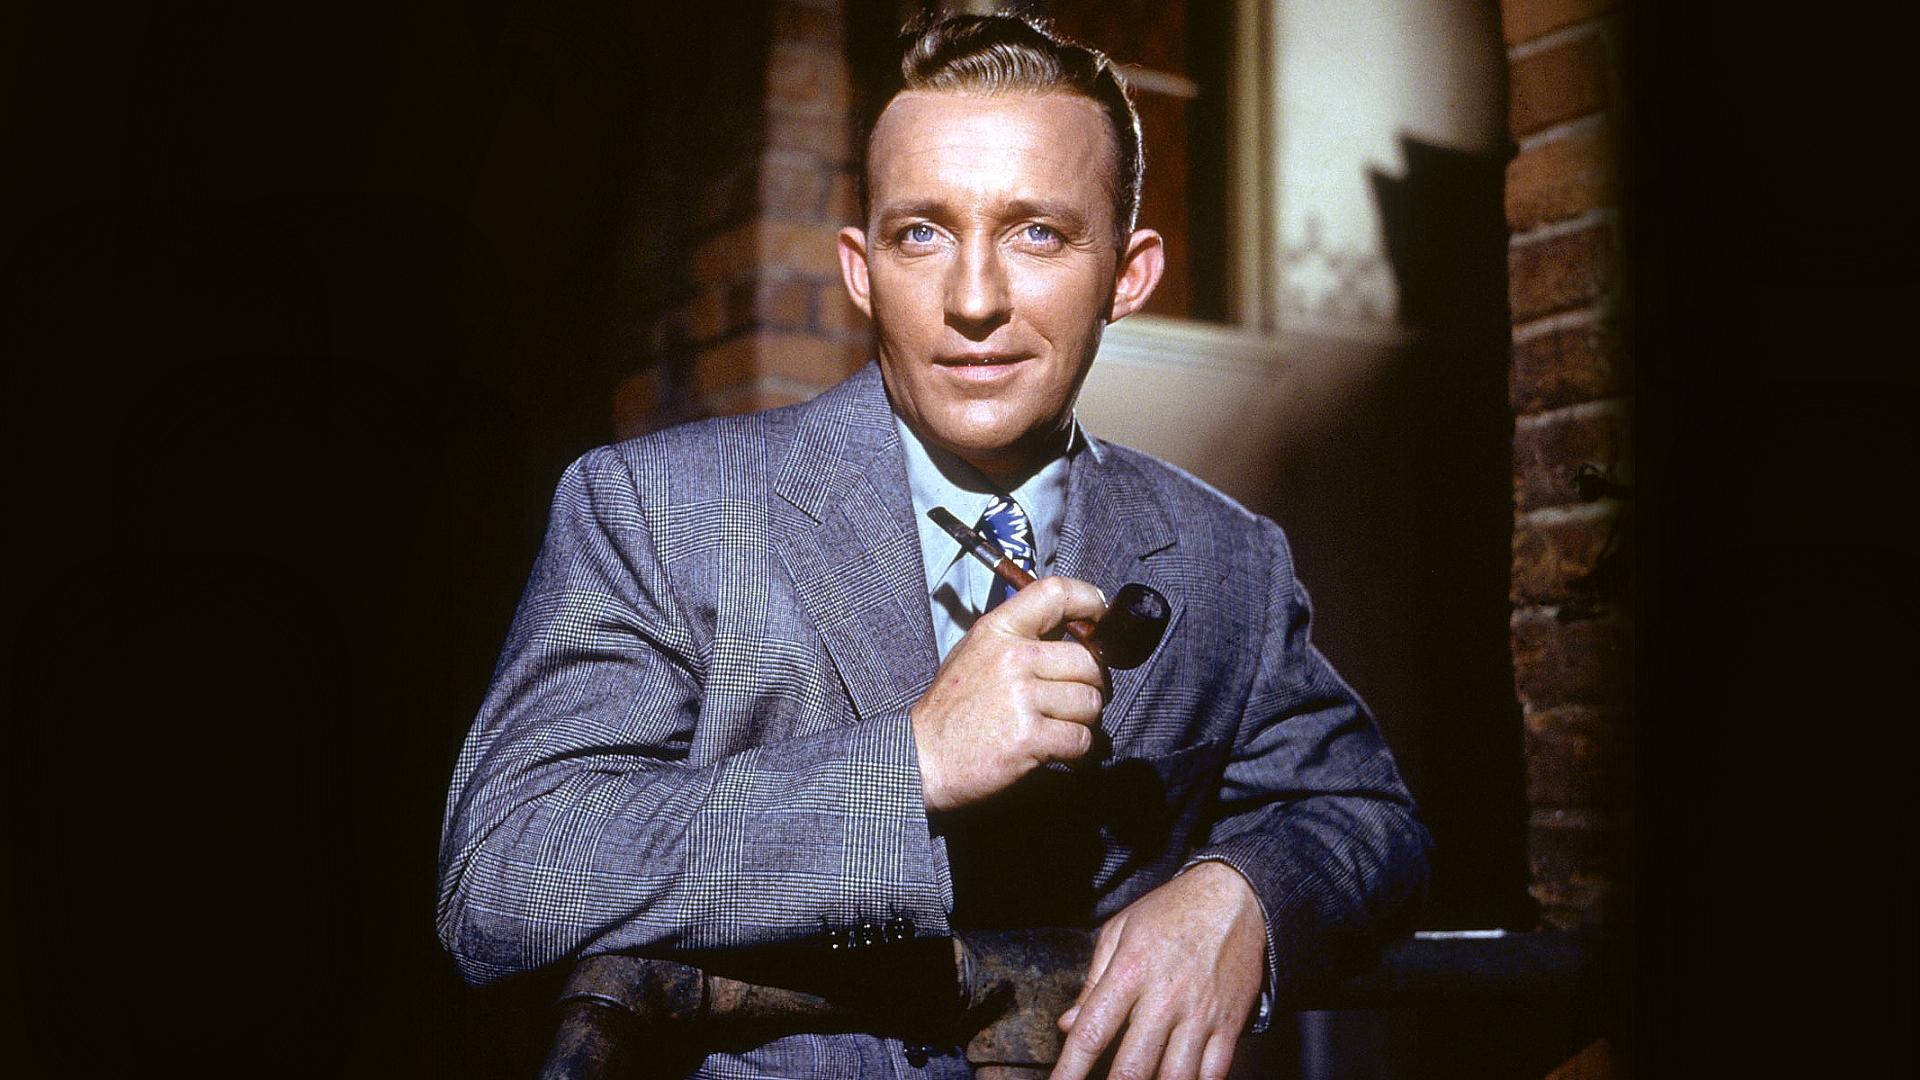 Colored Bing Crosby With Tobacco Pipe Wallpaper